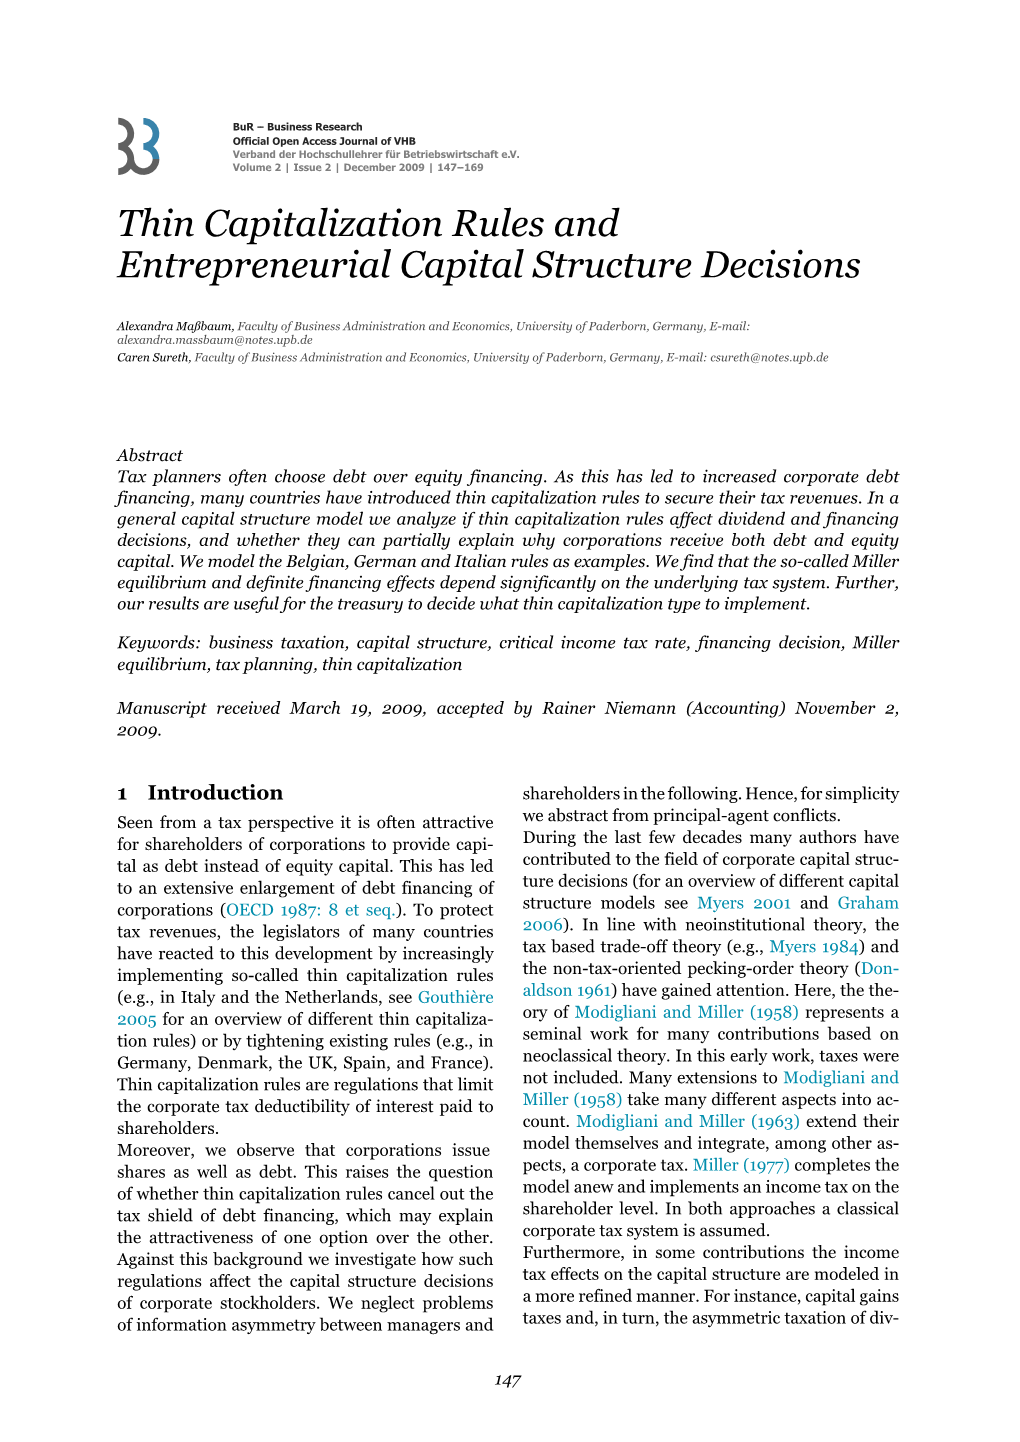 Thin Capitalization Rules and Entrepreneurial Capital Structure Decisions